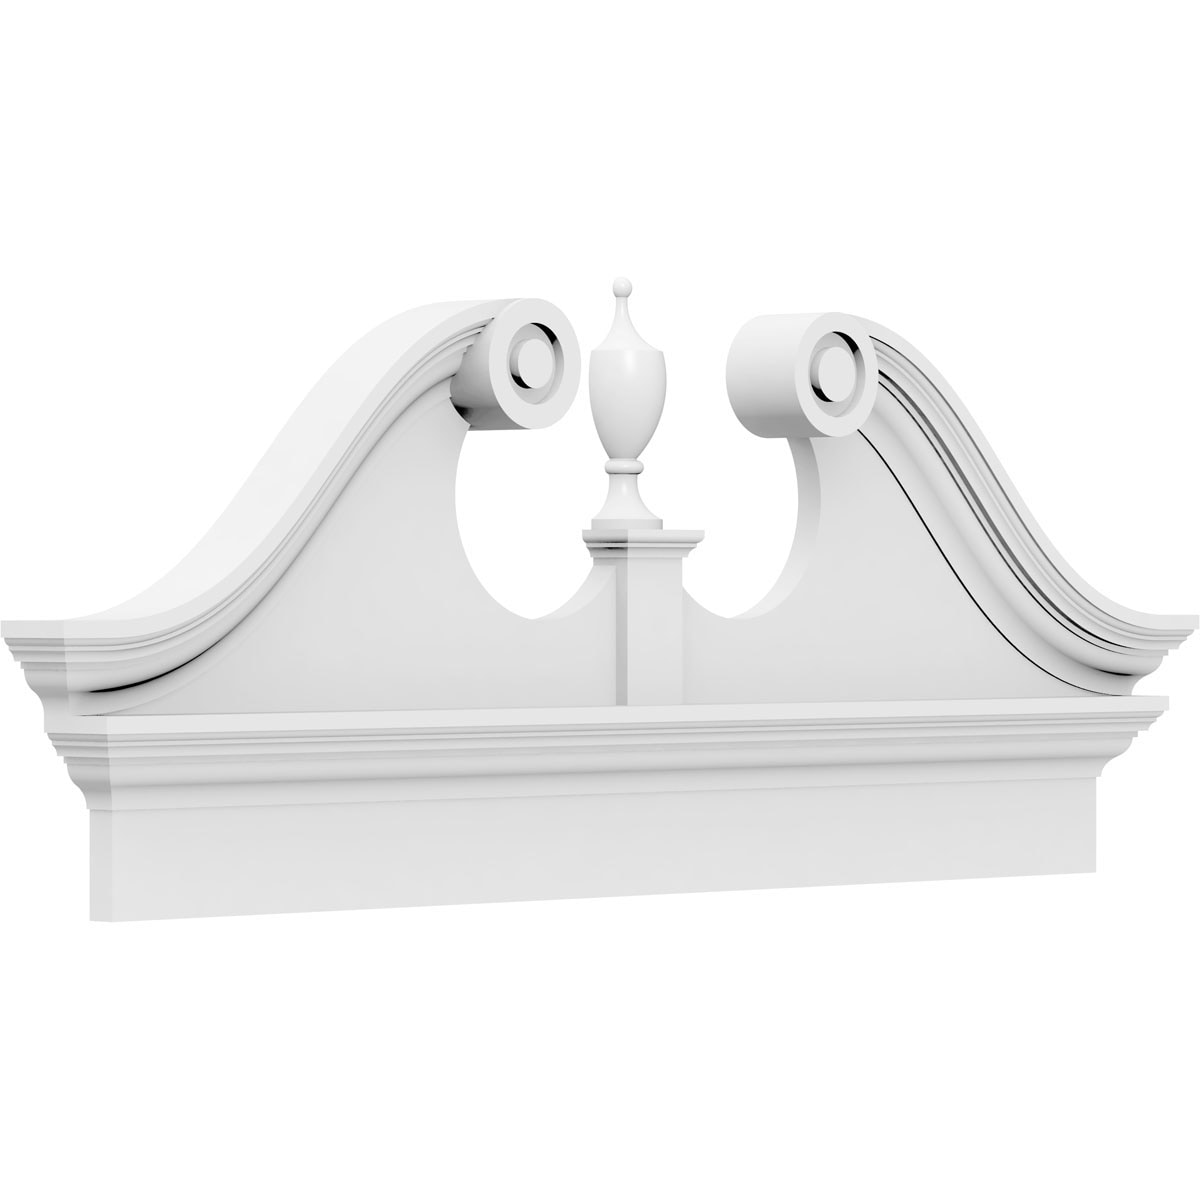 Ekena Millwork Rams Head 42-in x 17-3/8-in Unfinished PVC Pediment Entry Door Casing Accent in White | PEDPC042X175RHP00